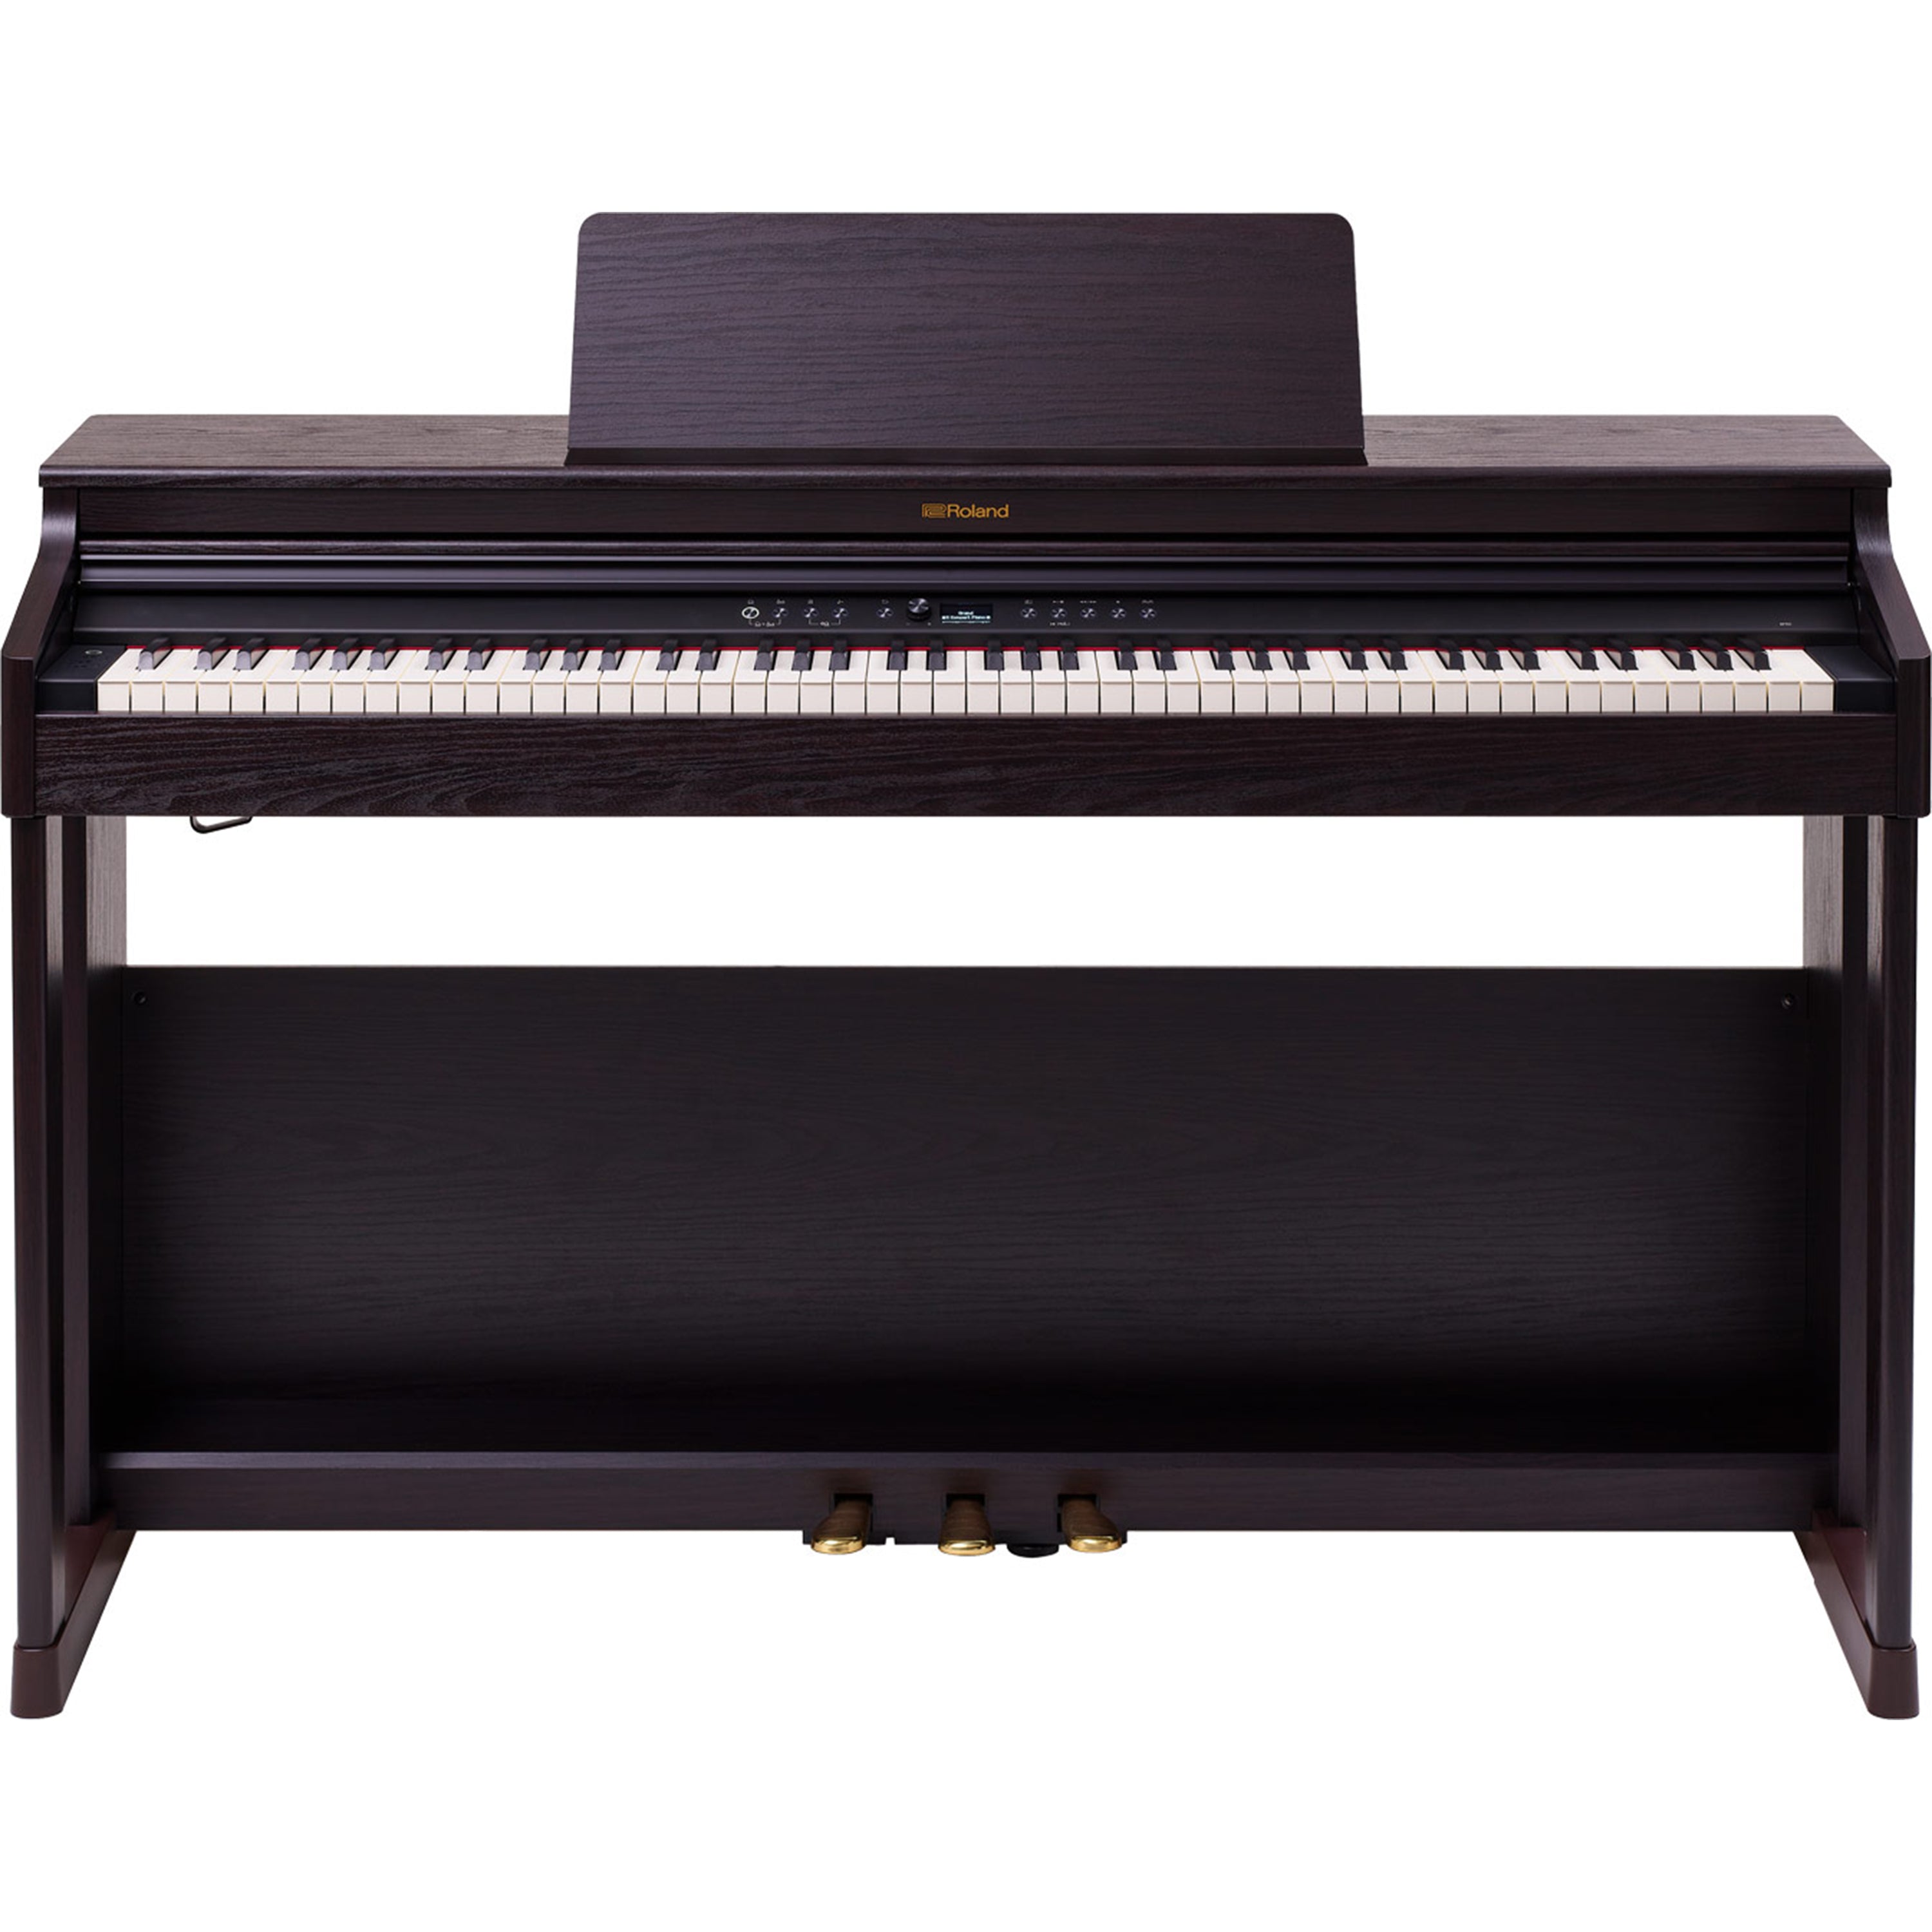 Roland RP701 Digital Piano - Dark Rosewood - front view